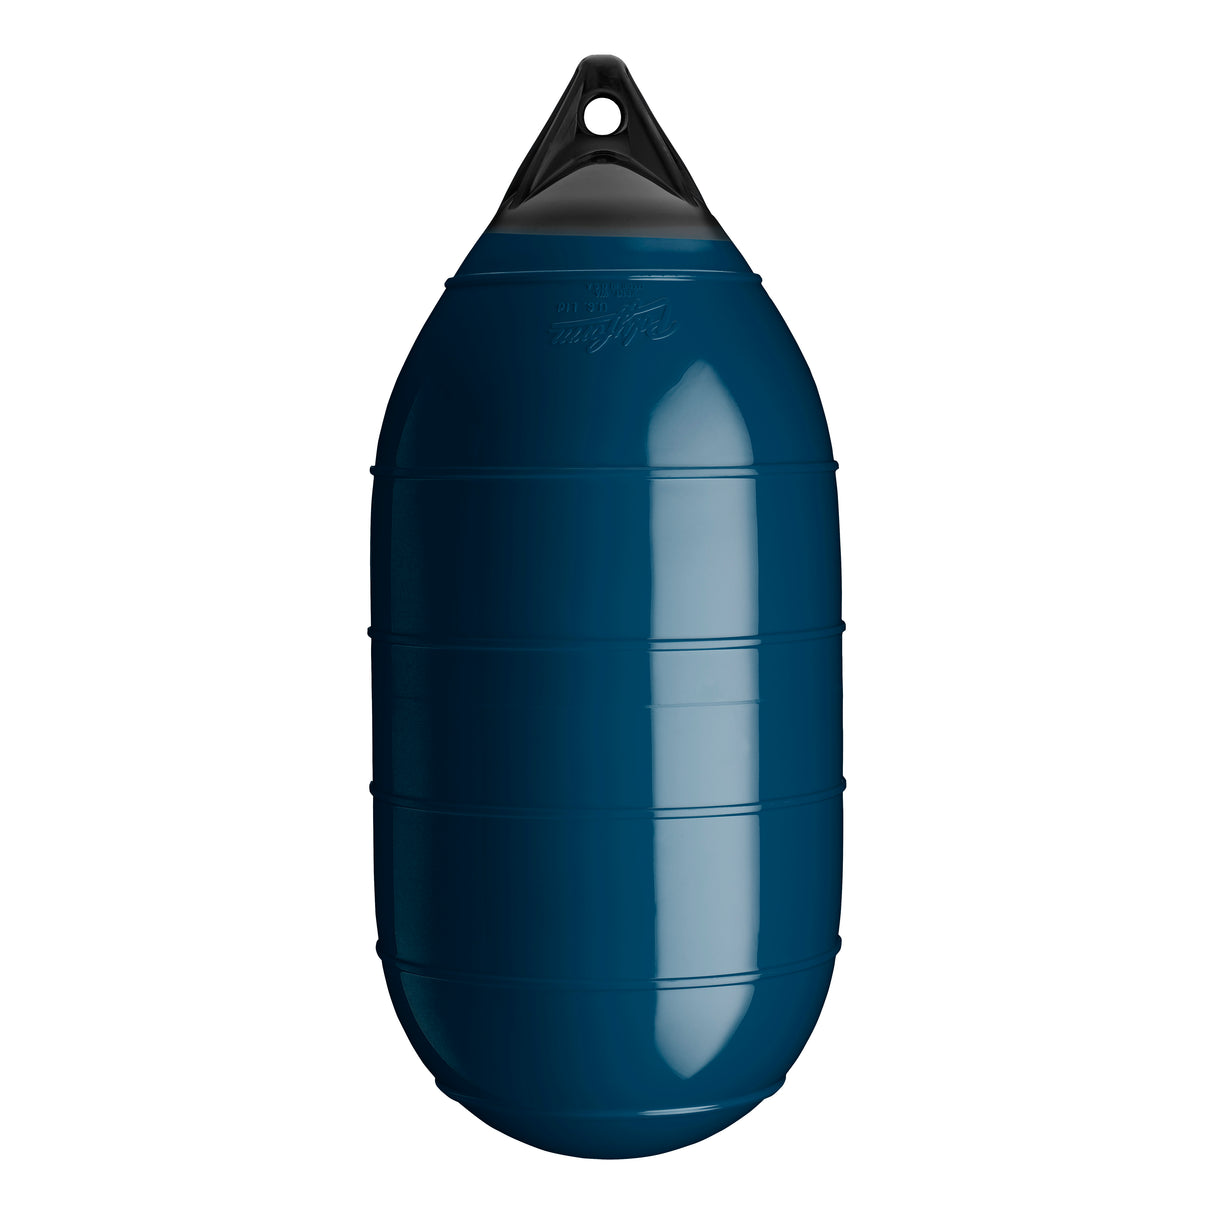 Catalina Blue low drag buoy with Black-Top, Polyform LD-3 